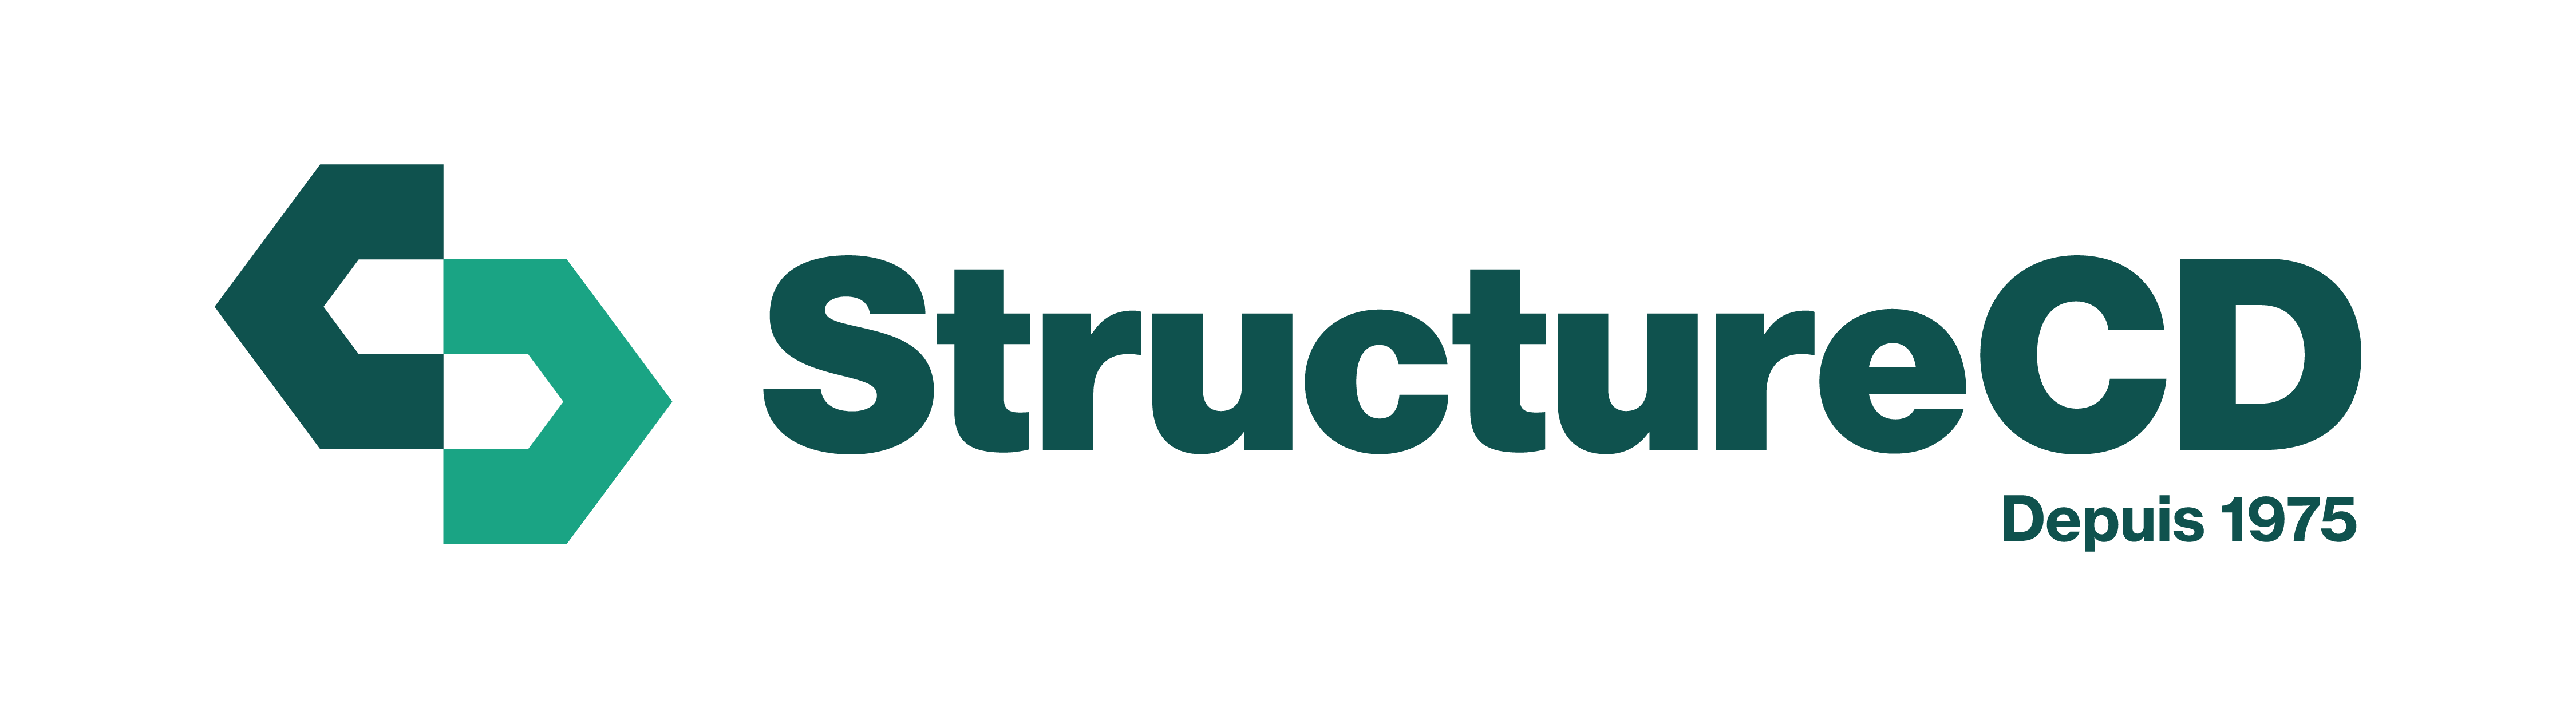 Structure CD